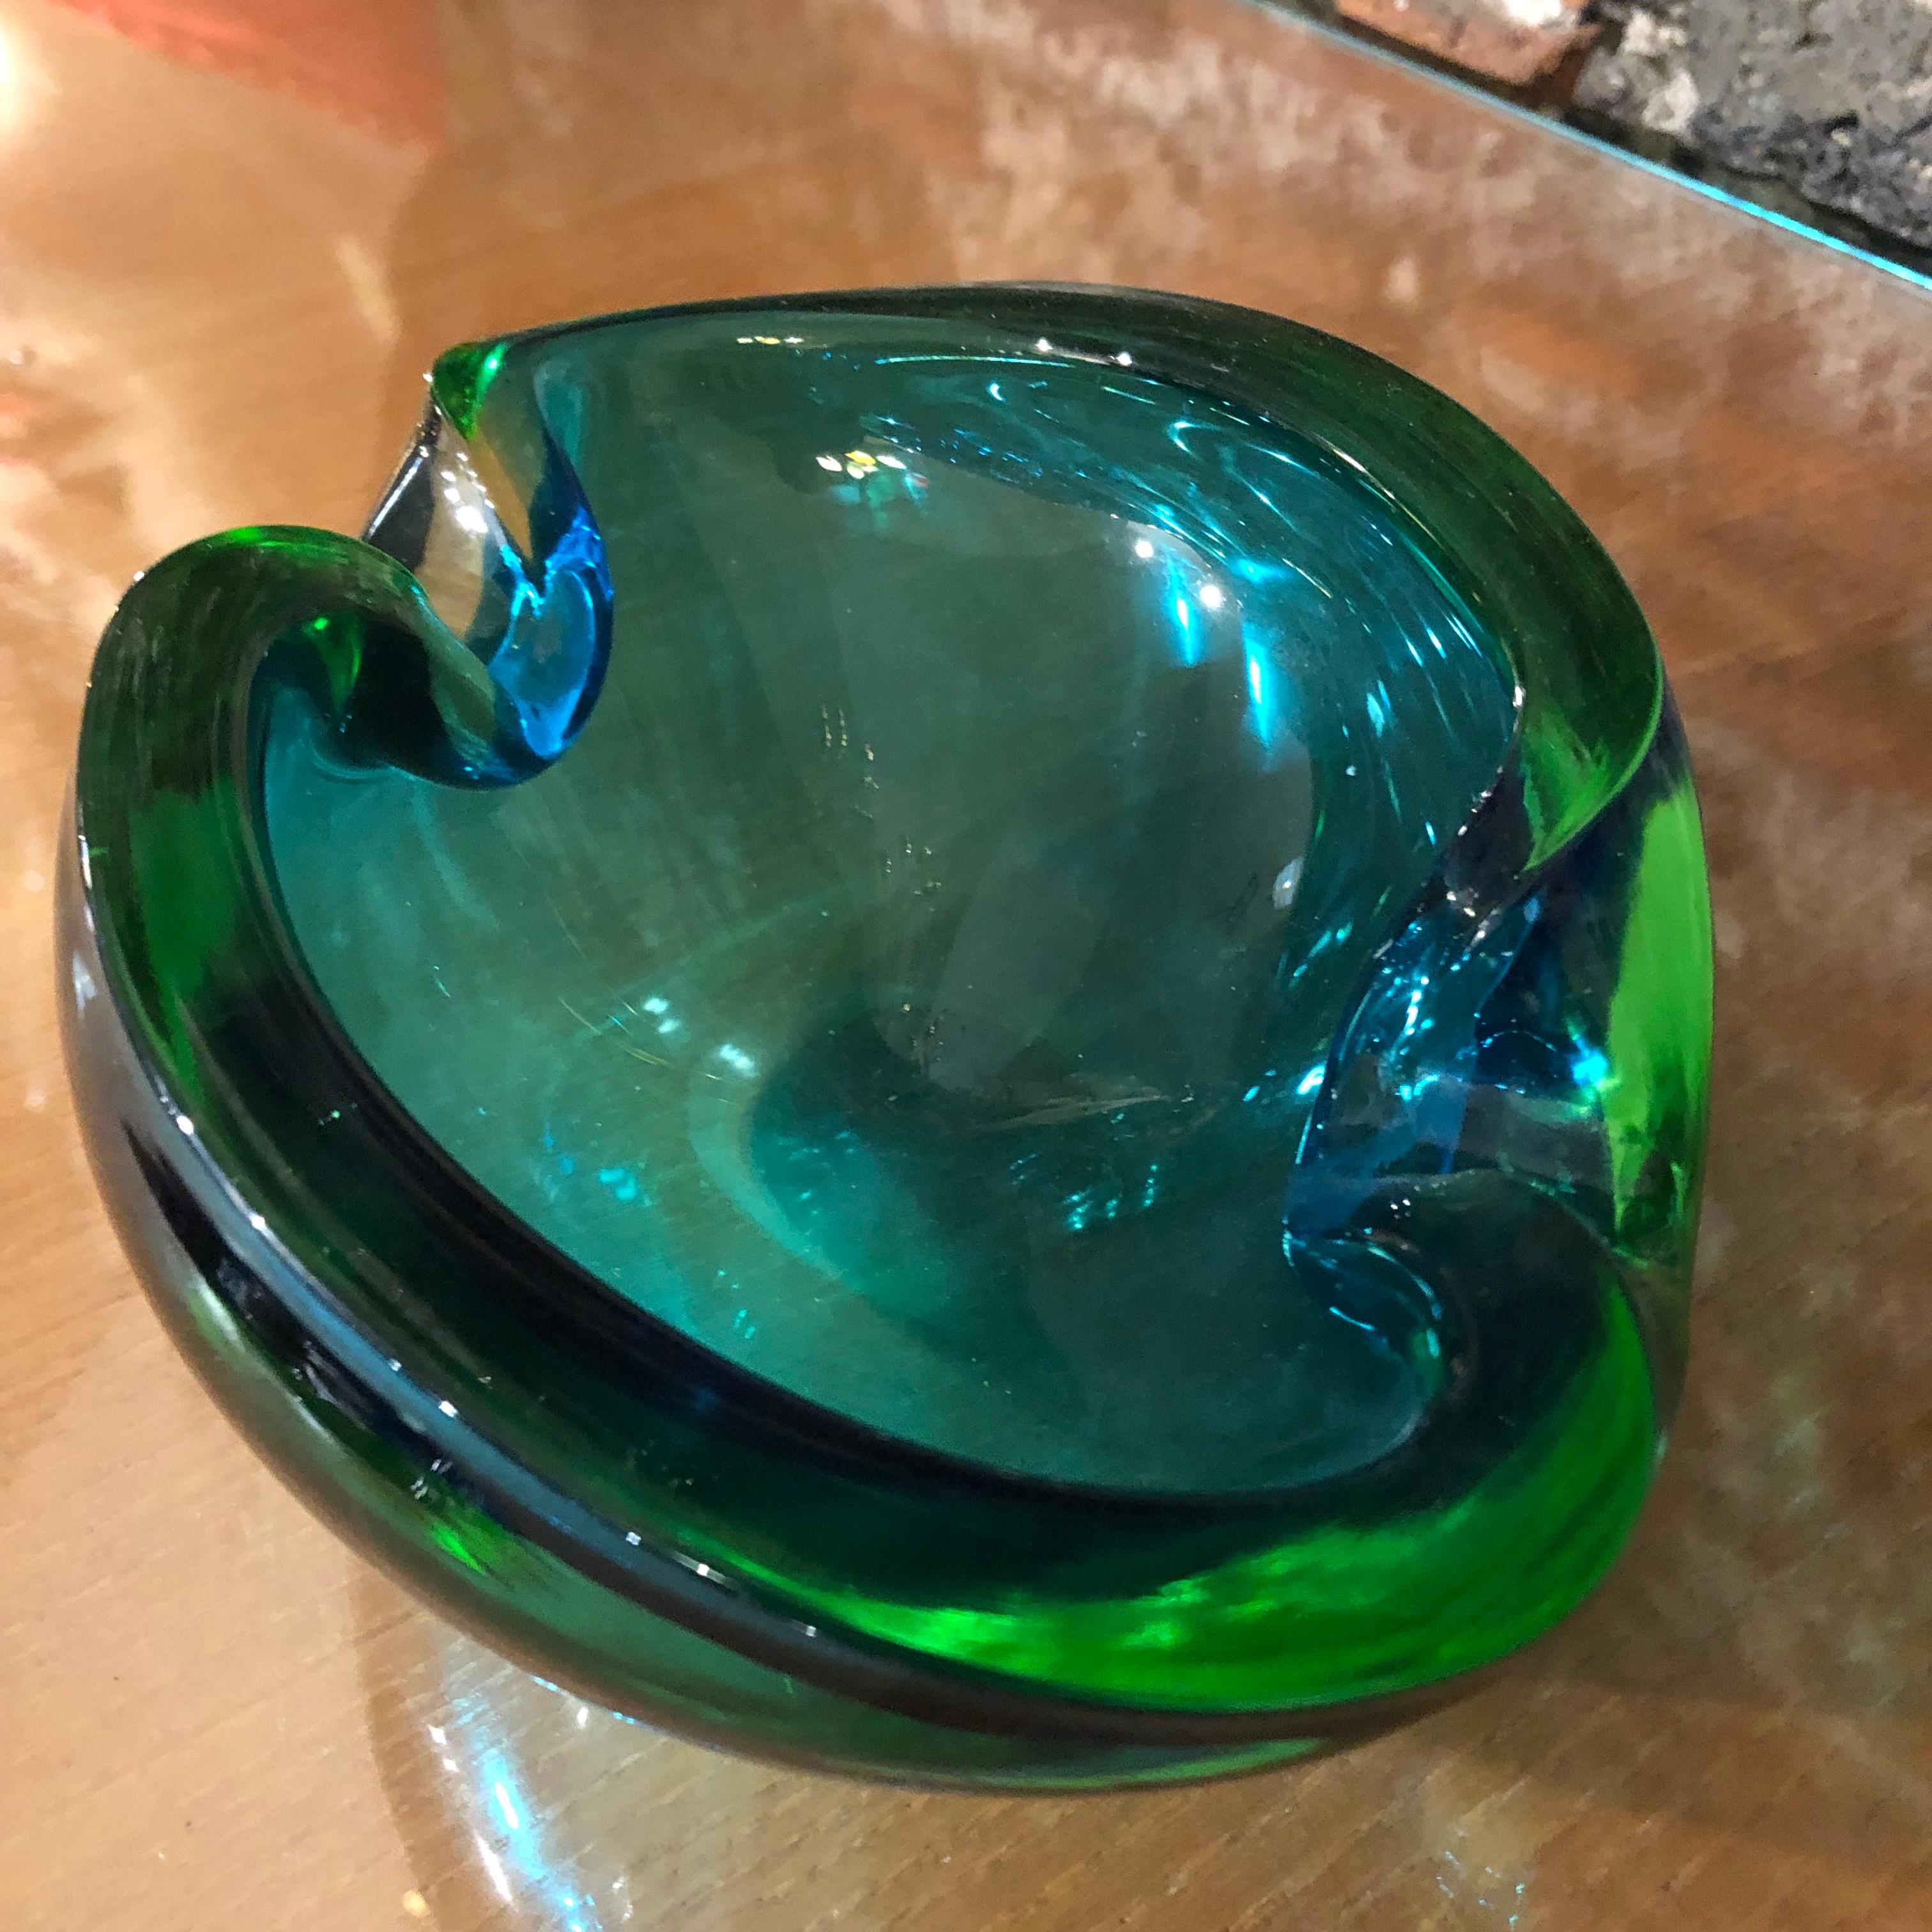 It's an oval Murano glass oval ashtray made in Italy by Seguso in the 1970s. It's in perfect conditions.